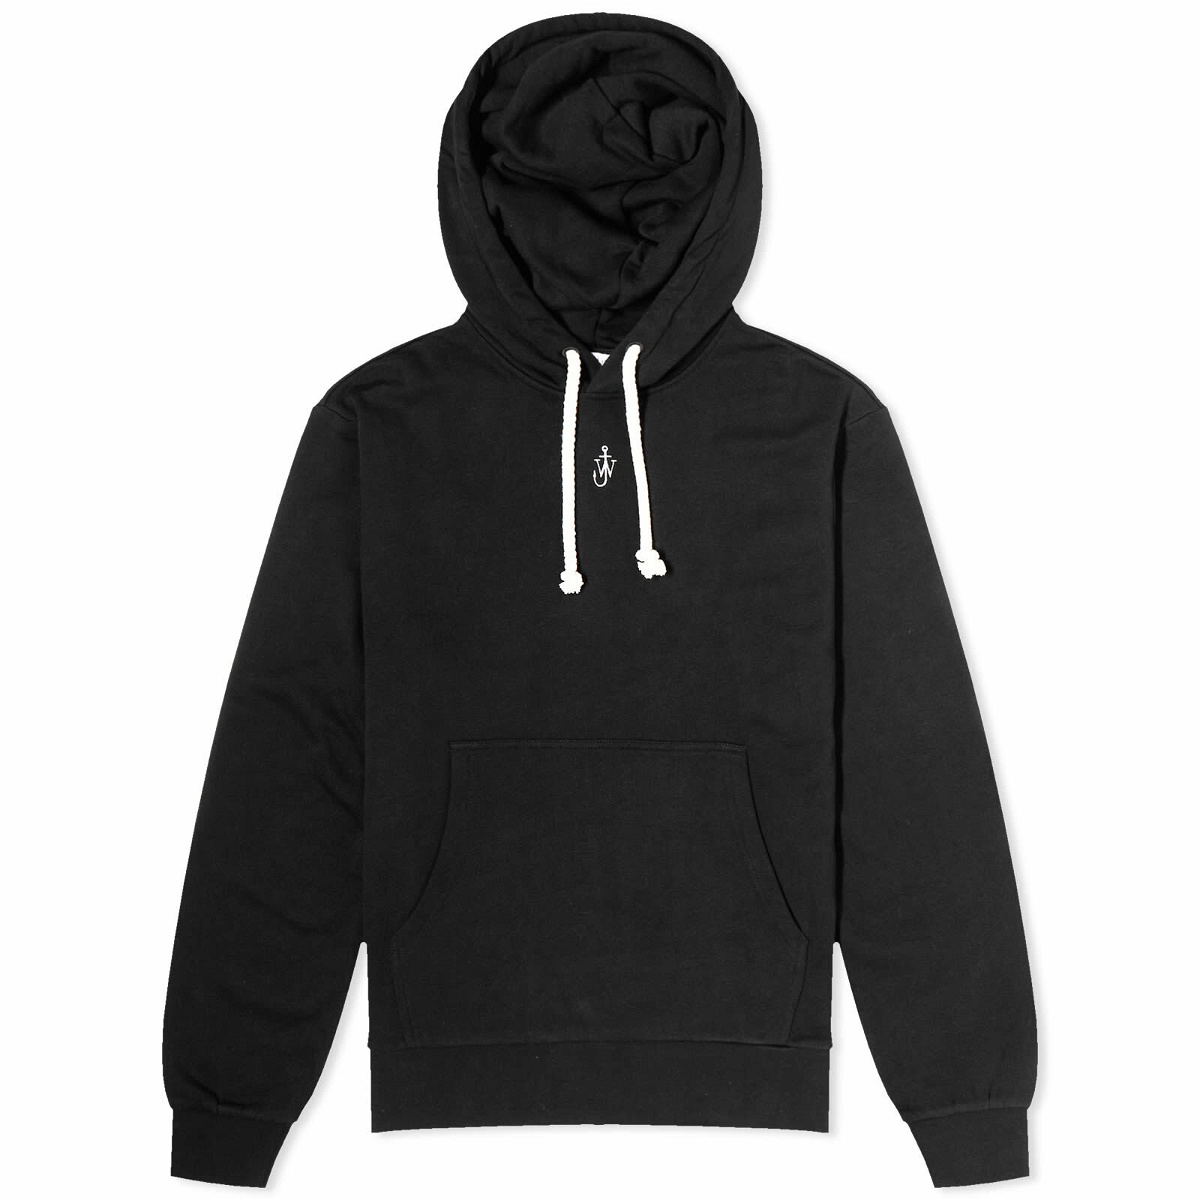 JW Anderson Women's Anchor Embroidered Hoodie in Black JW Anderson